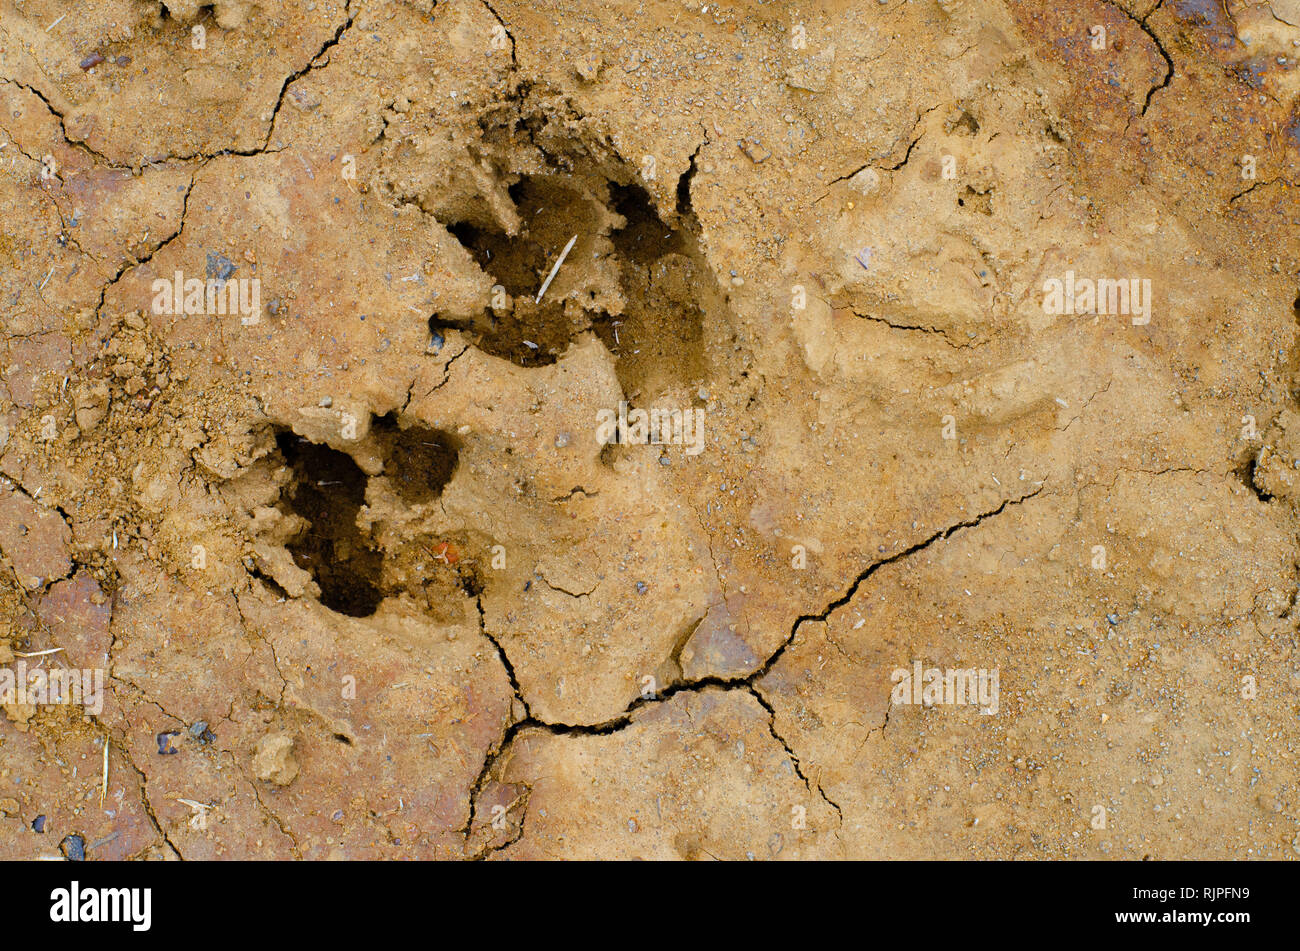 Dog footprints in a drying mud puddle make an intersting texture or background. Stock Photo